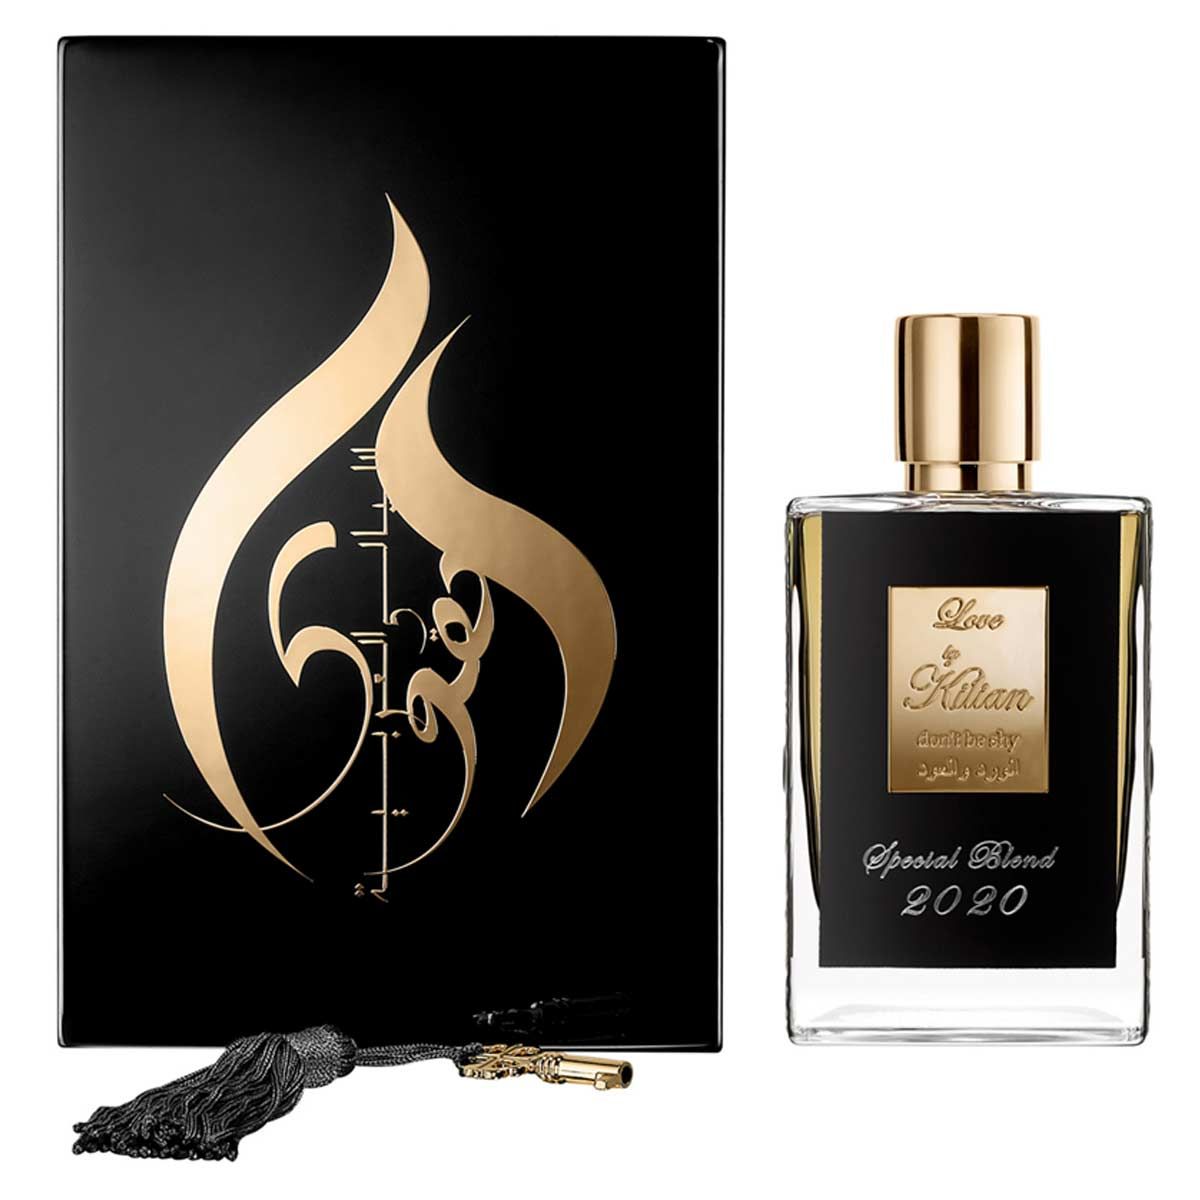 Kilian Love by Kilian Rose and Oud Special Blend 2020 namperfume